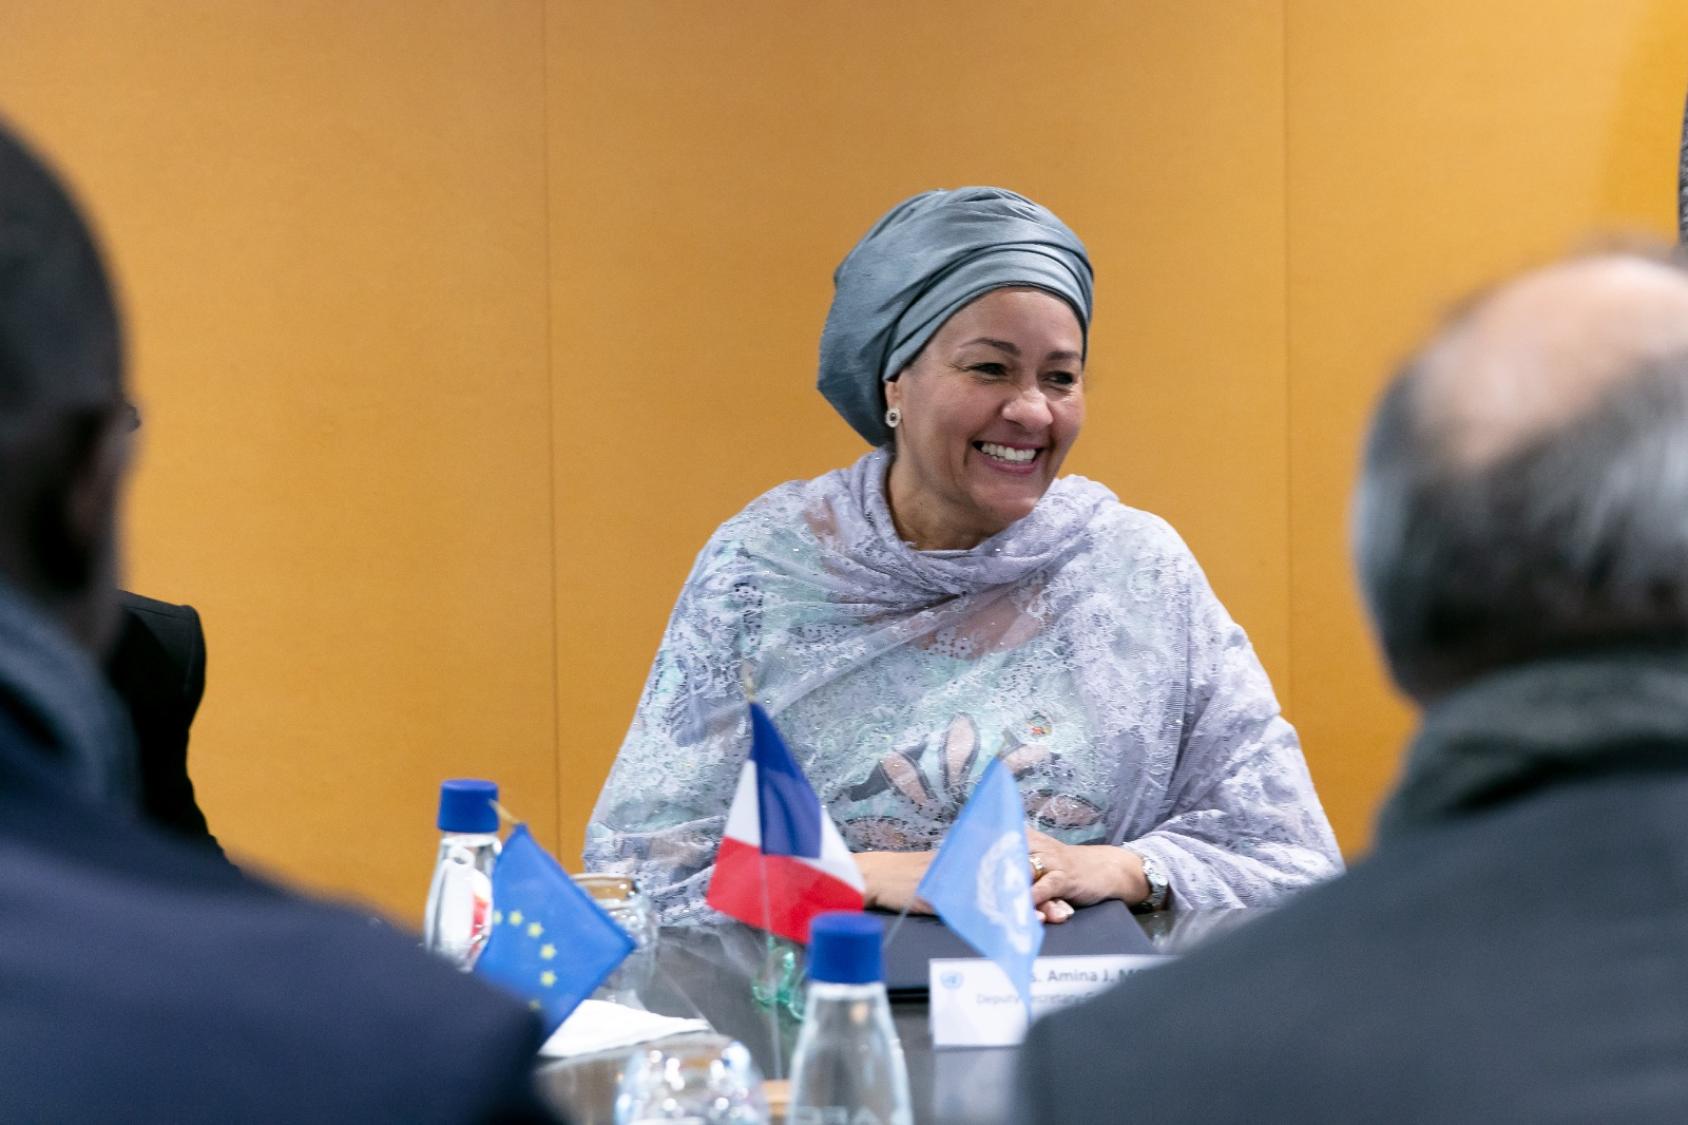 The UN Deputy Secretary-General wears a light colored wrap and talks to partners across a table at a strategic meeting.